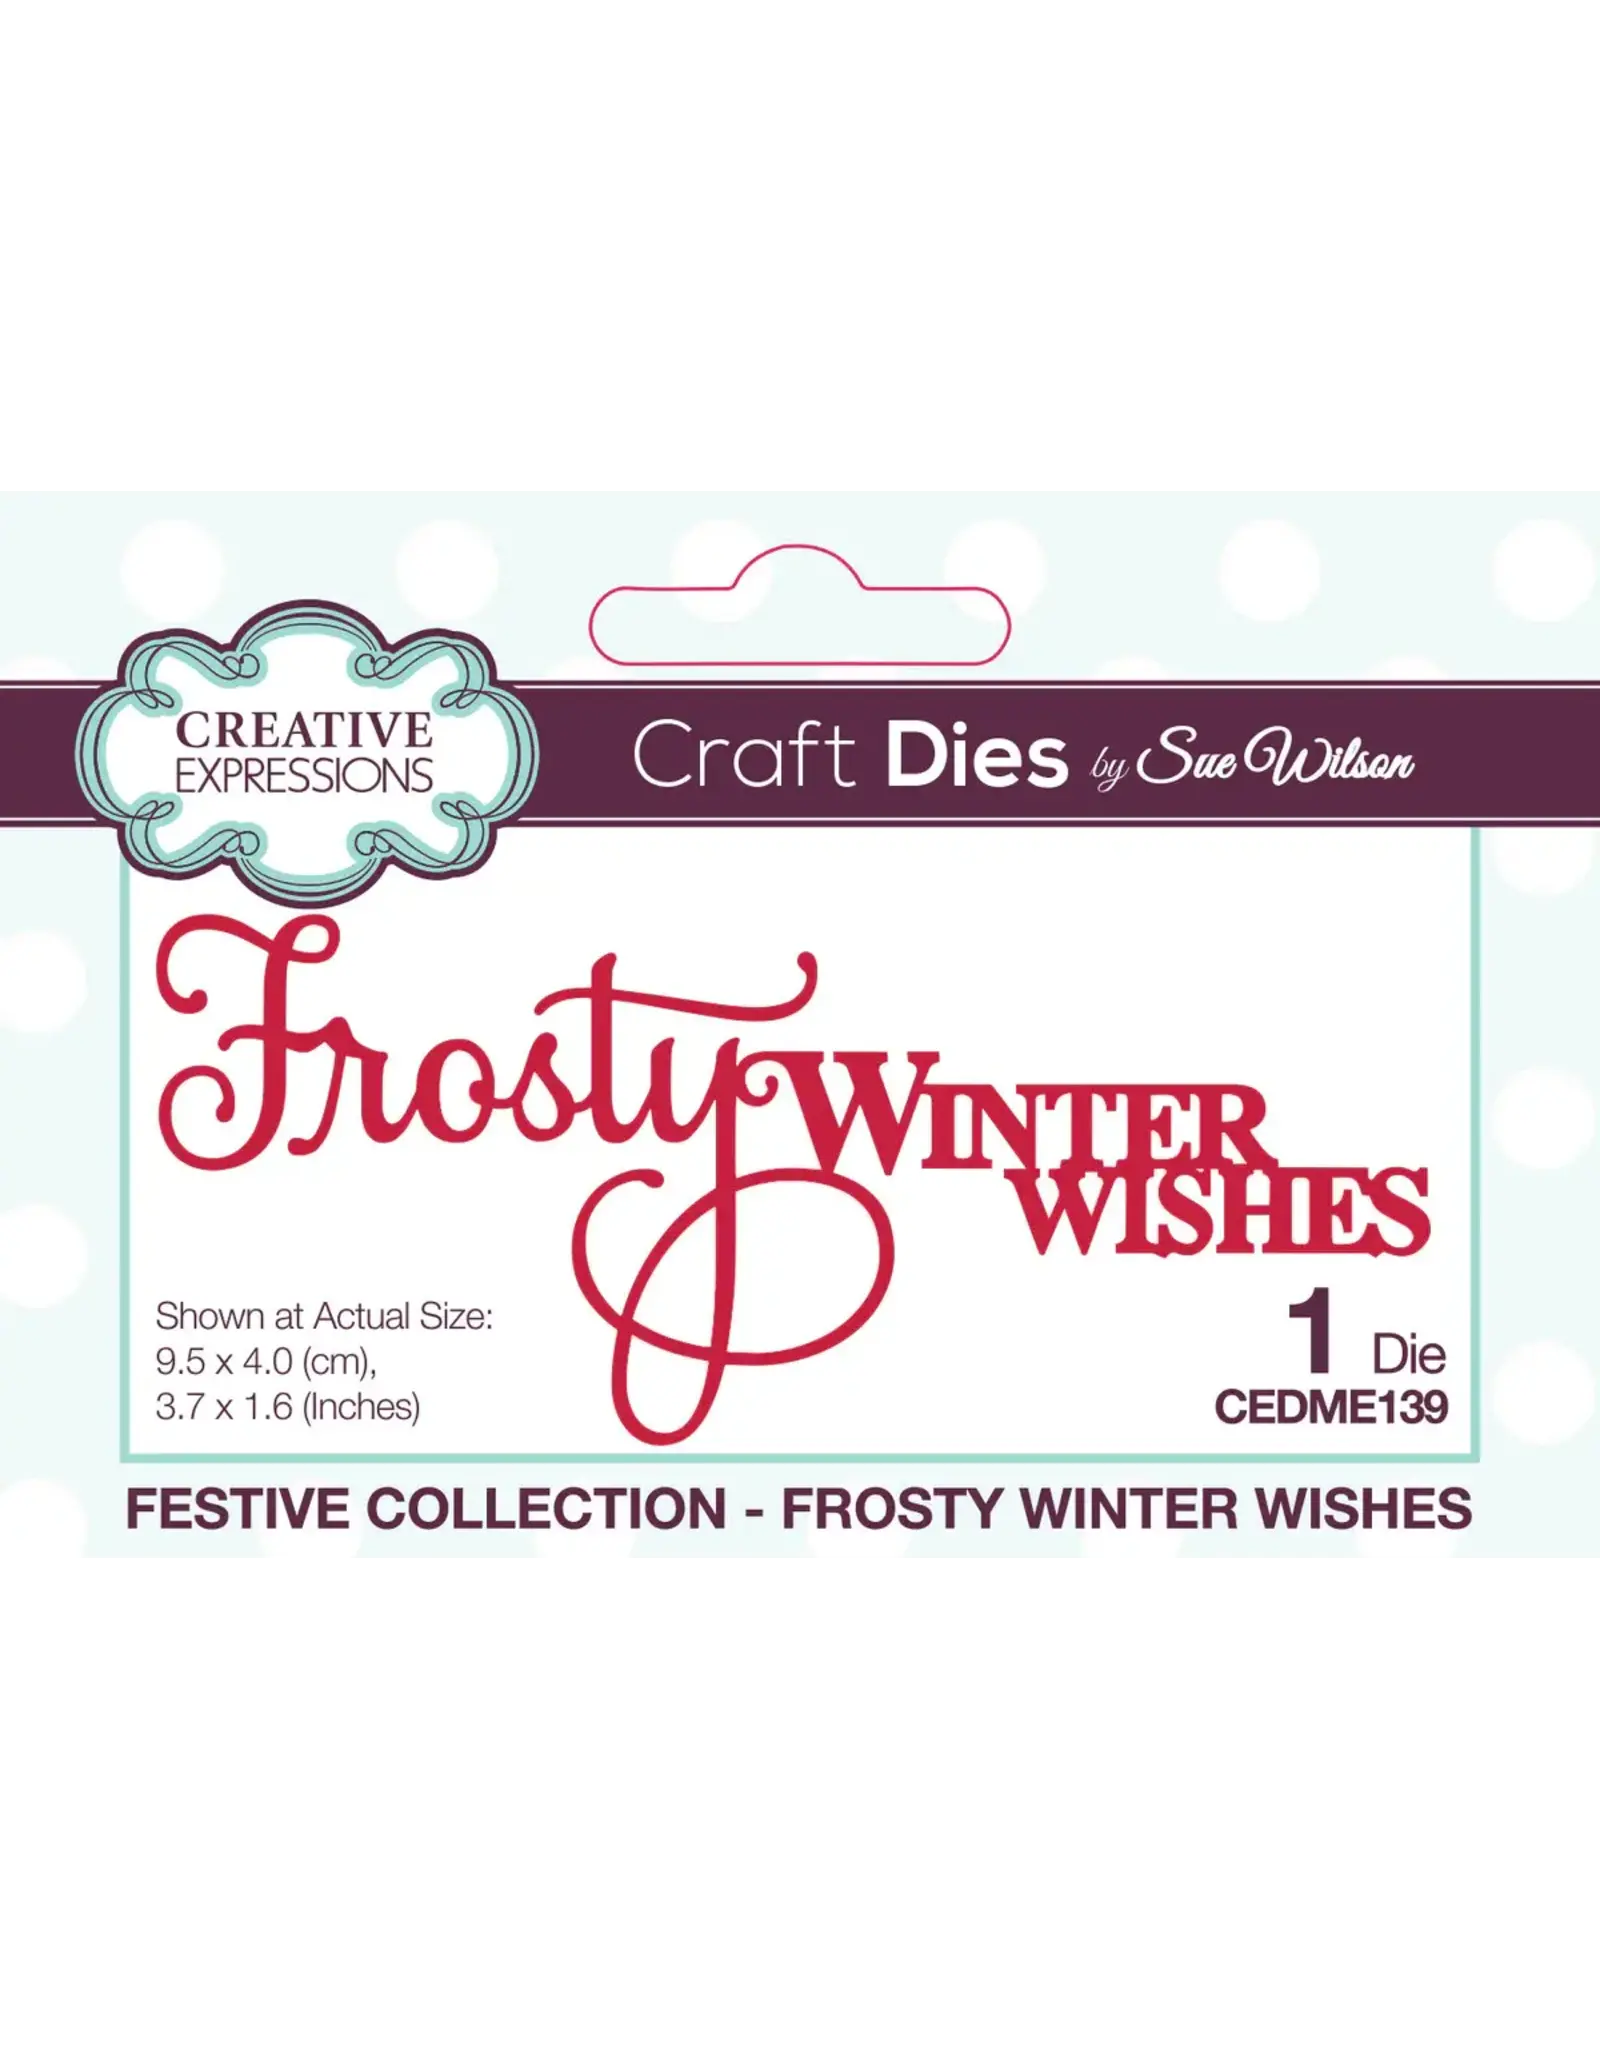 CREATIVE EXPRESSIONS CREATIVE EXPRESSIONS SUE WILSON FESTIVE COLLECTION FROSTY WINTER WISHES DIE